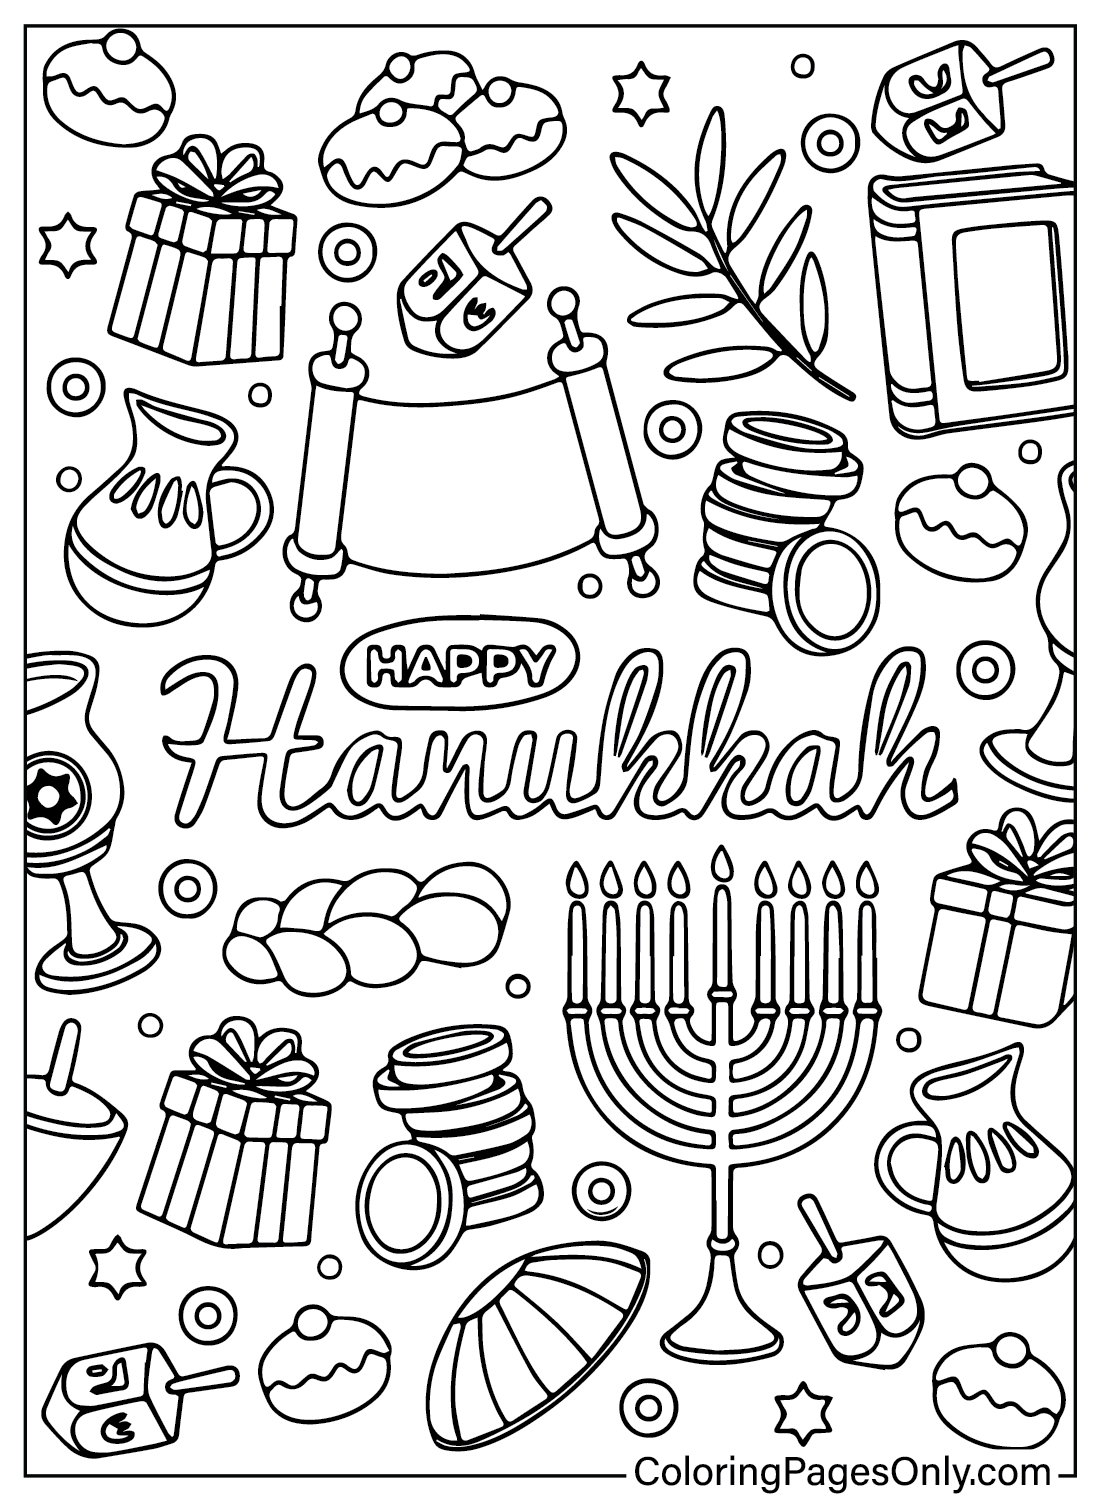 Hanukkah Coloring Pages to Download from Hanukkah